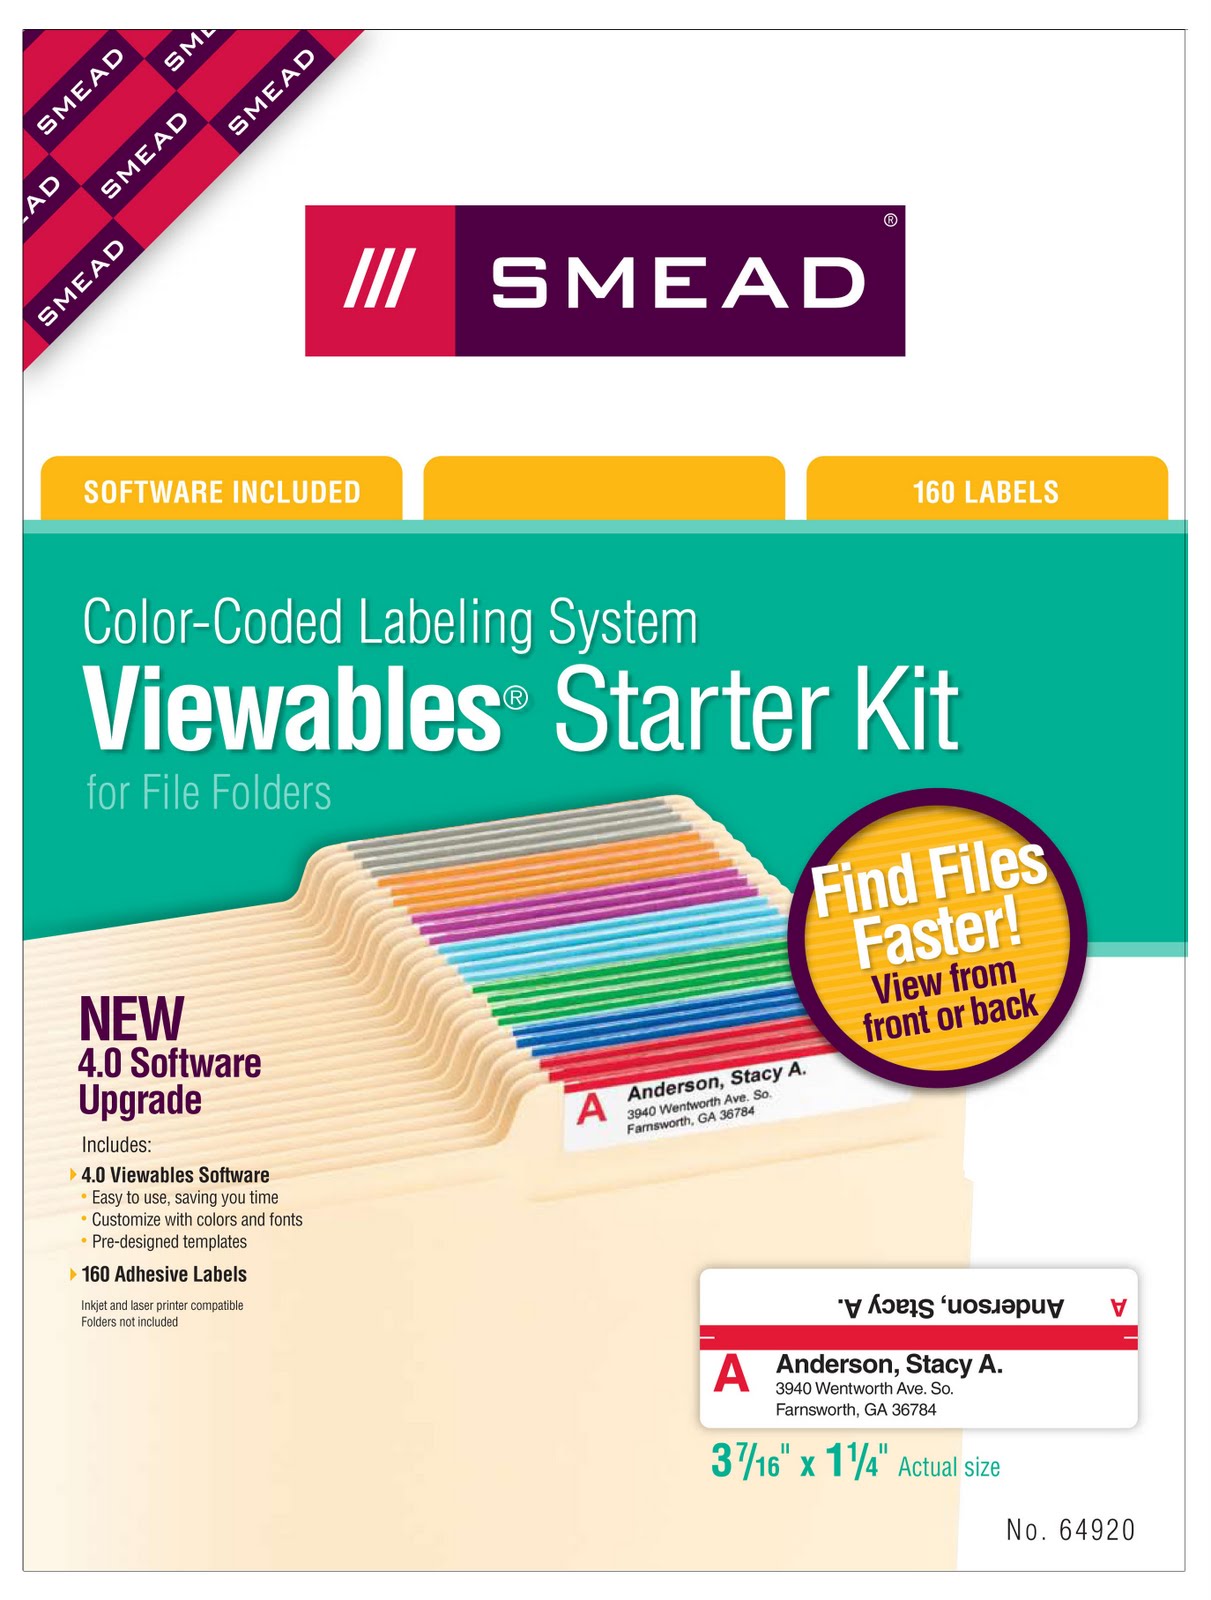 steps-to-organization-smead-product-reviews